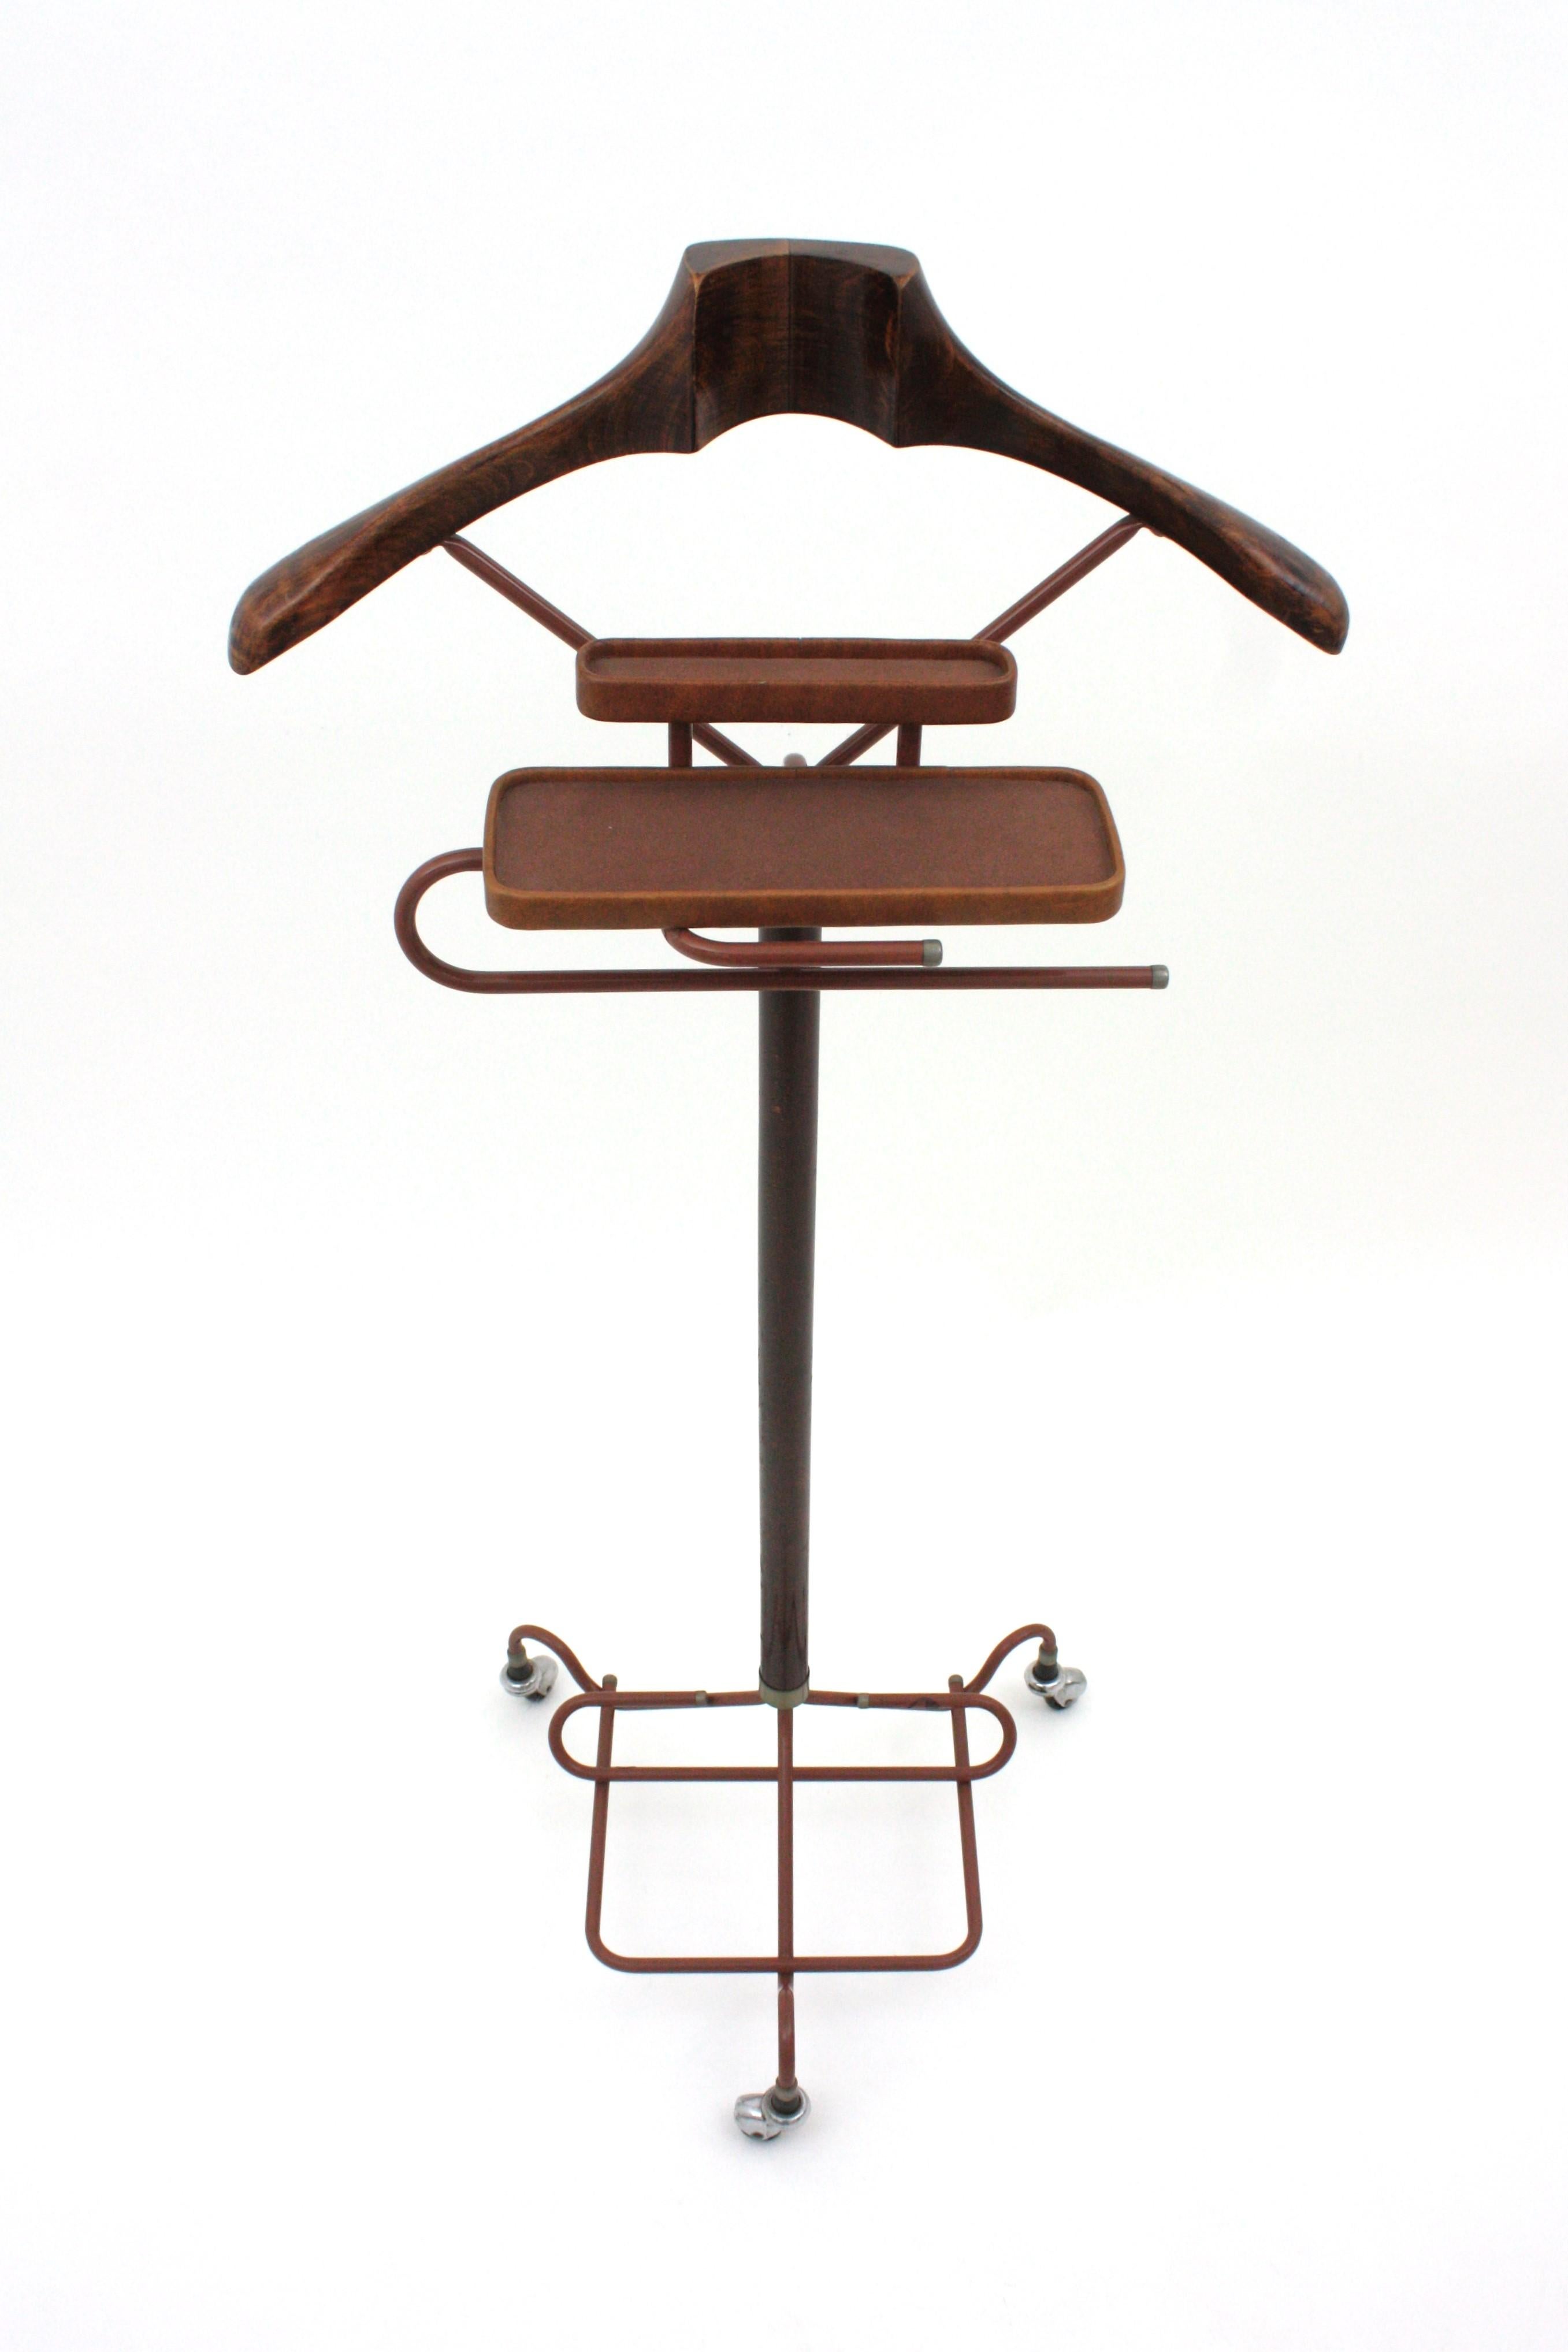 Metal Italian Beech Wood and Acrylic Valet Stand Dressboy, 1960s For Sale